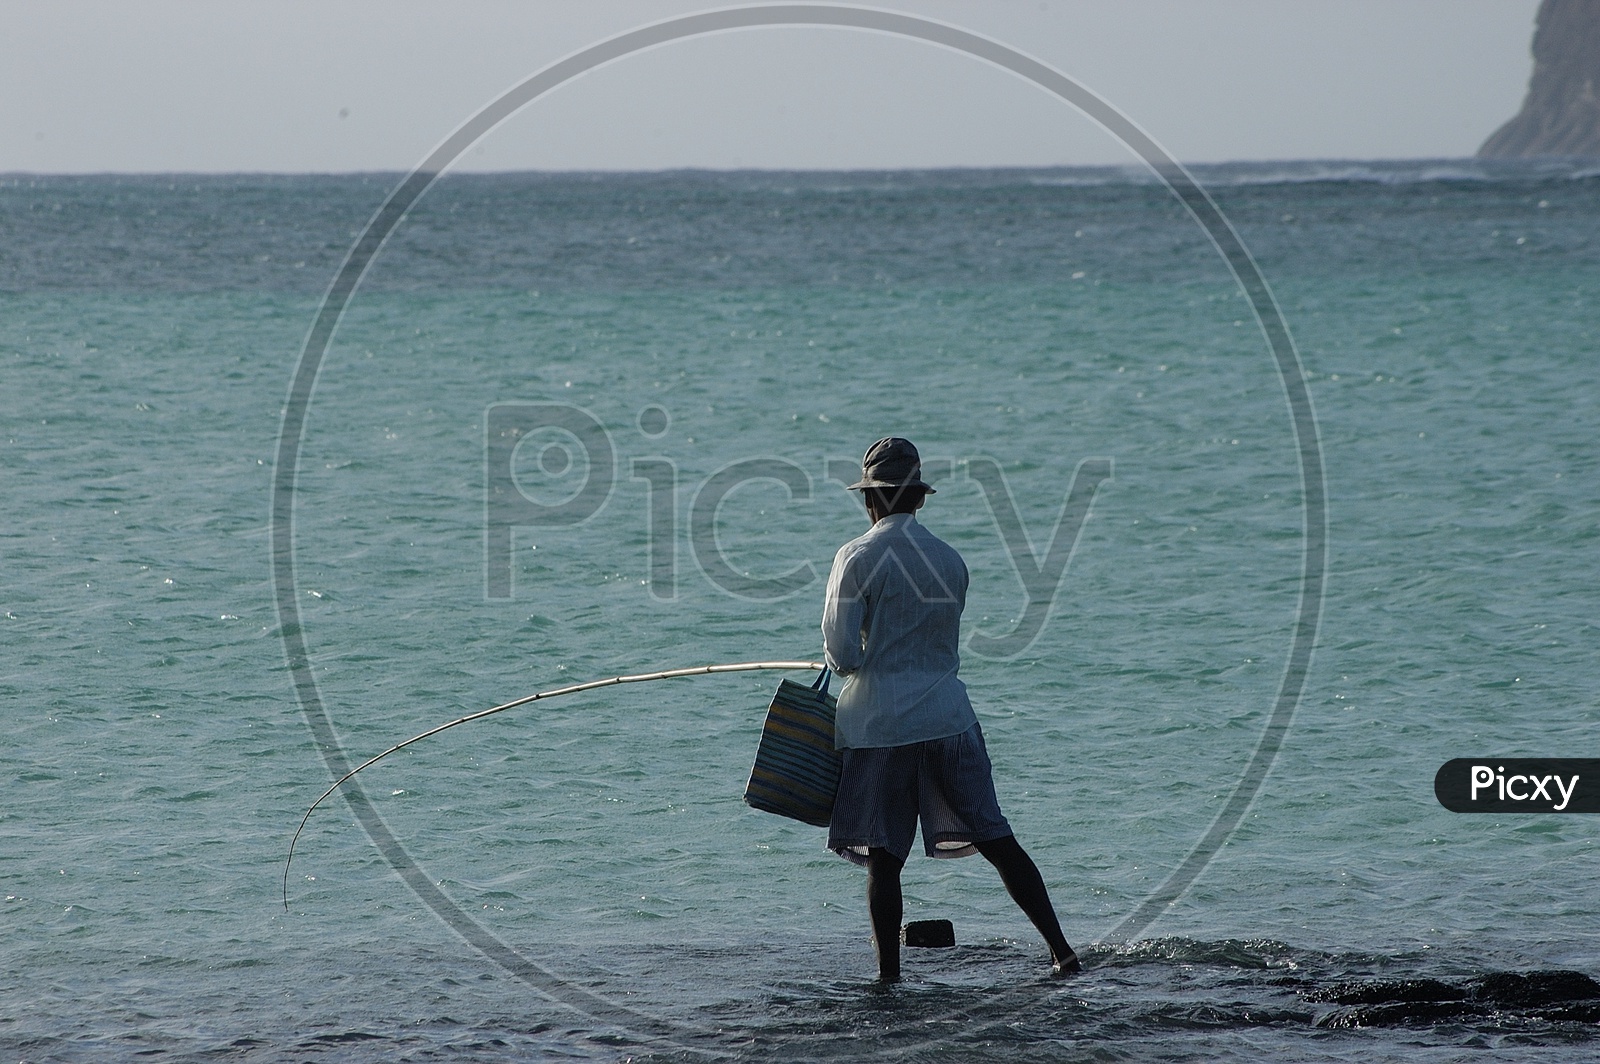 A Fisher Man Fishing With Fishing Road on a Beach